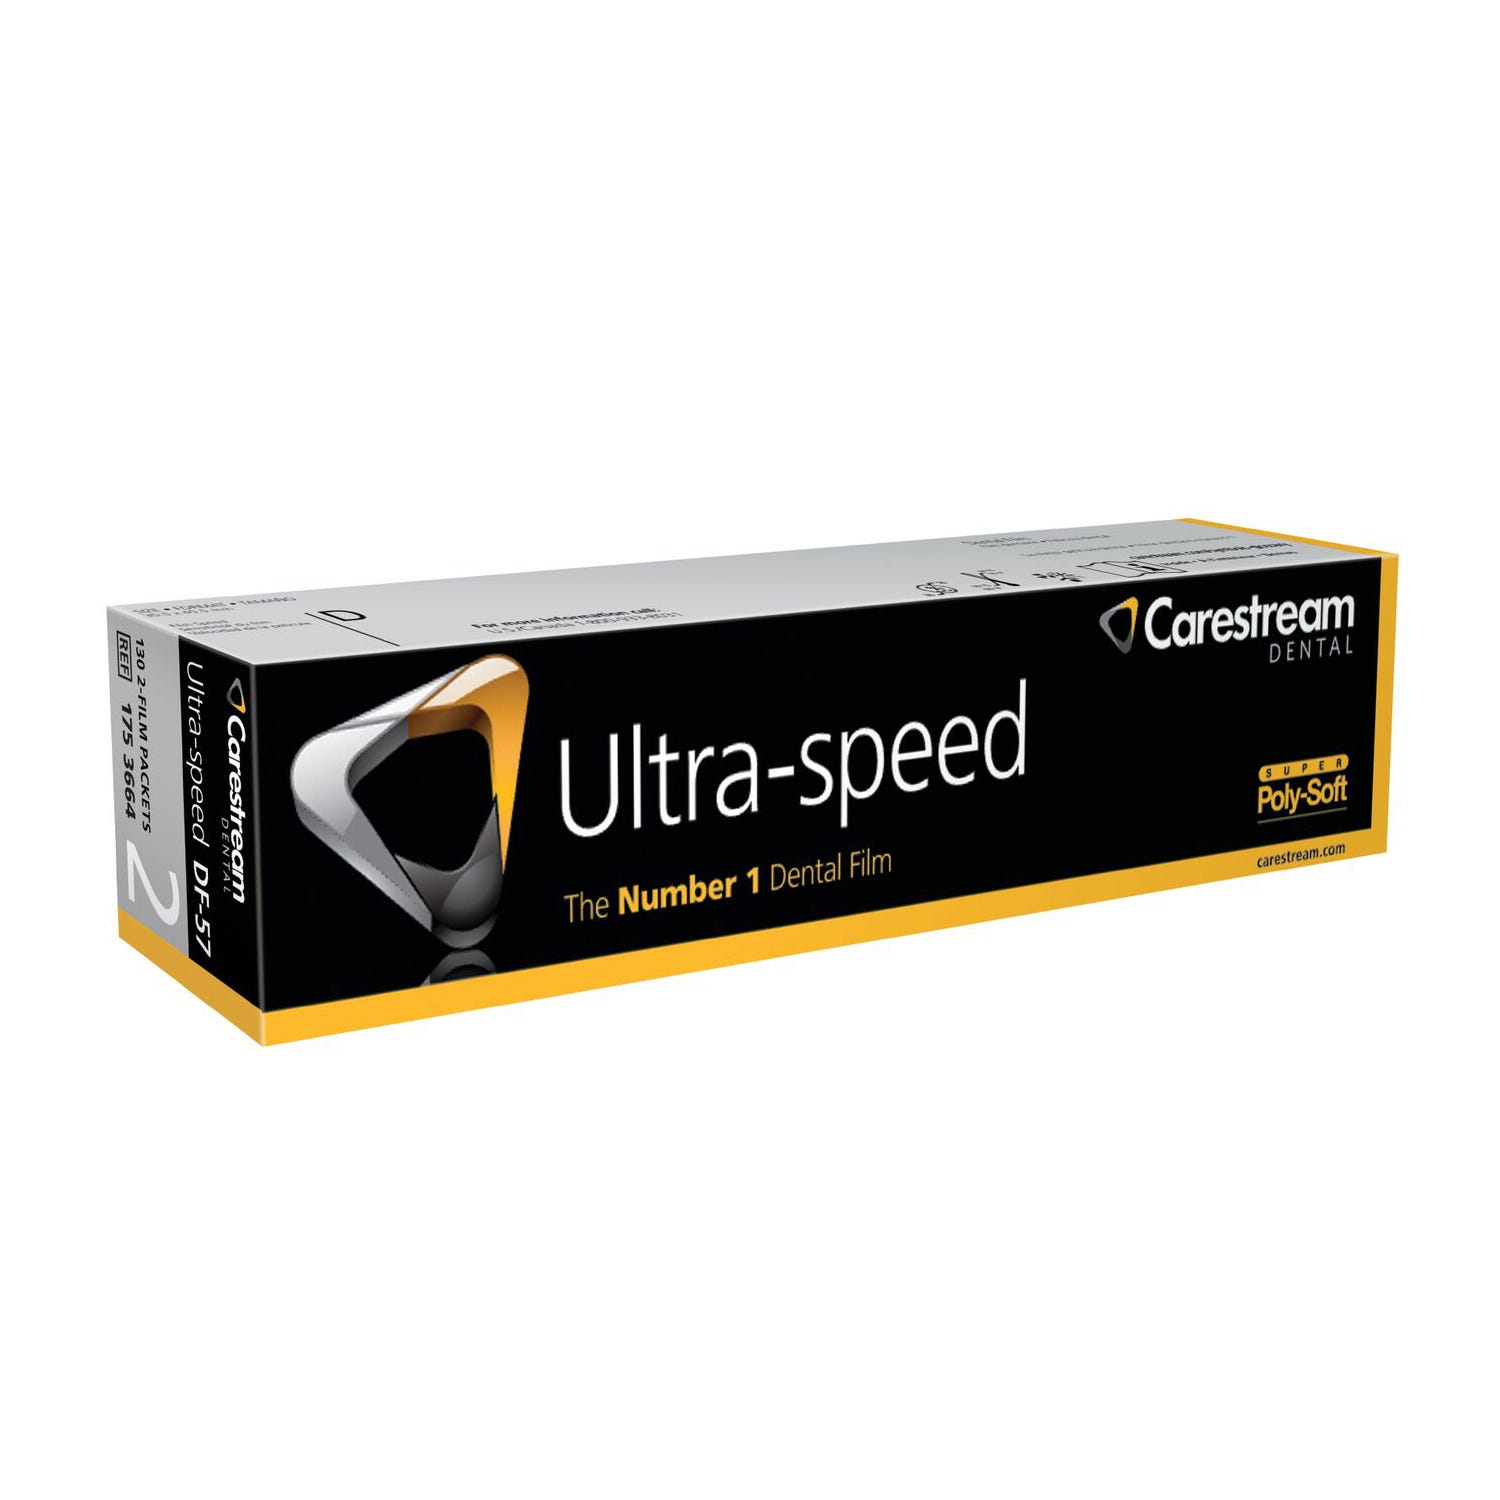 Ultra-speed™ Intraoral Dental Film, Size 2, DF-57, Super Poly-Soft™ Packets (Double Film) - 130/Box